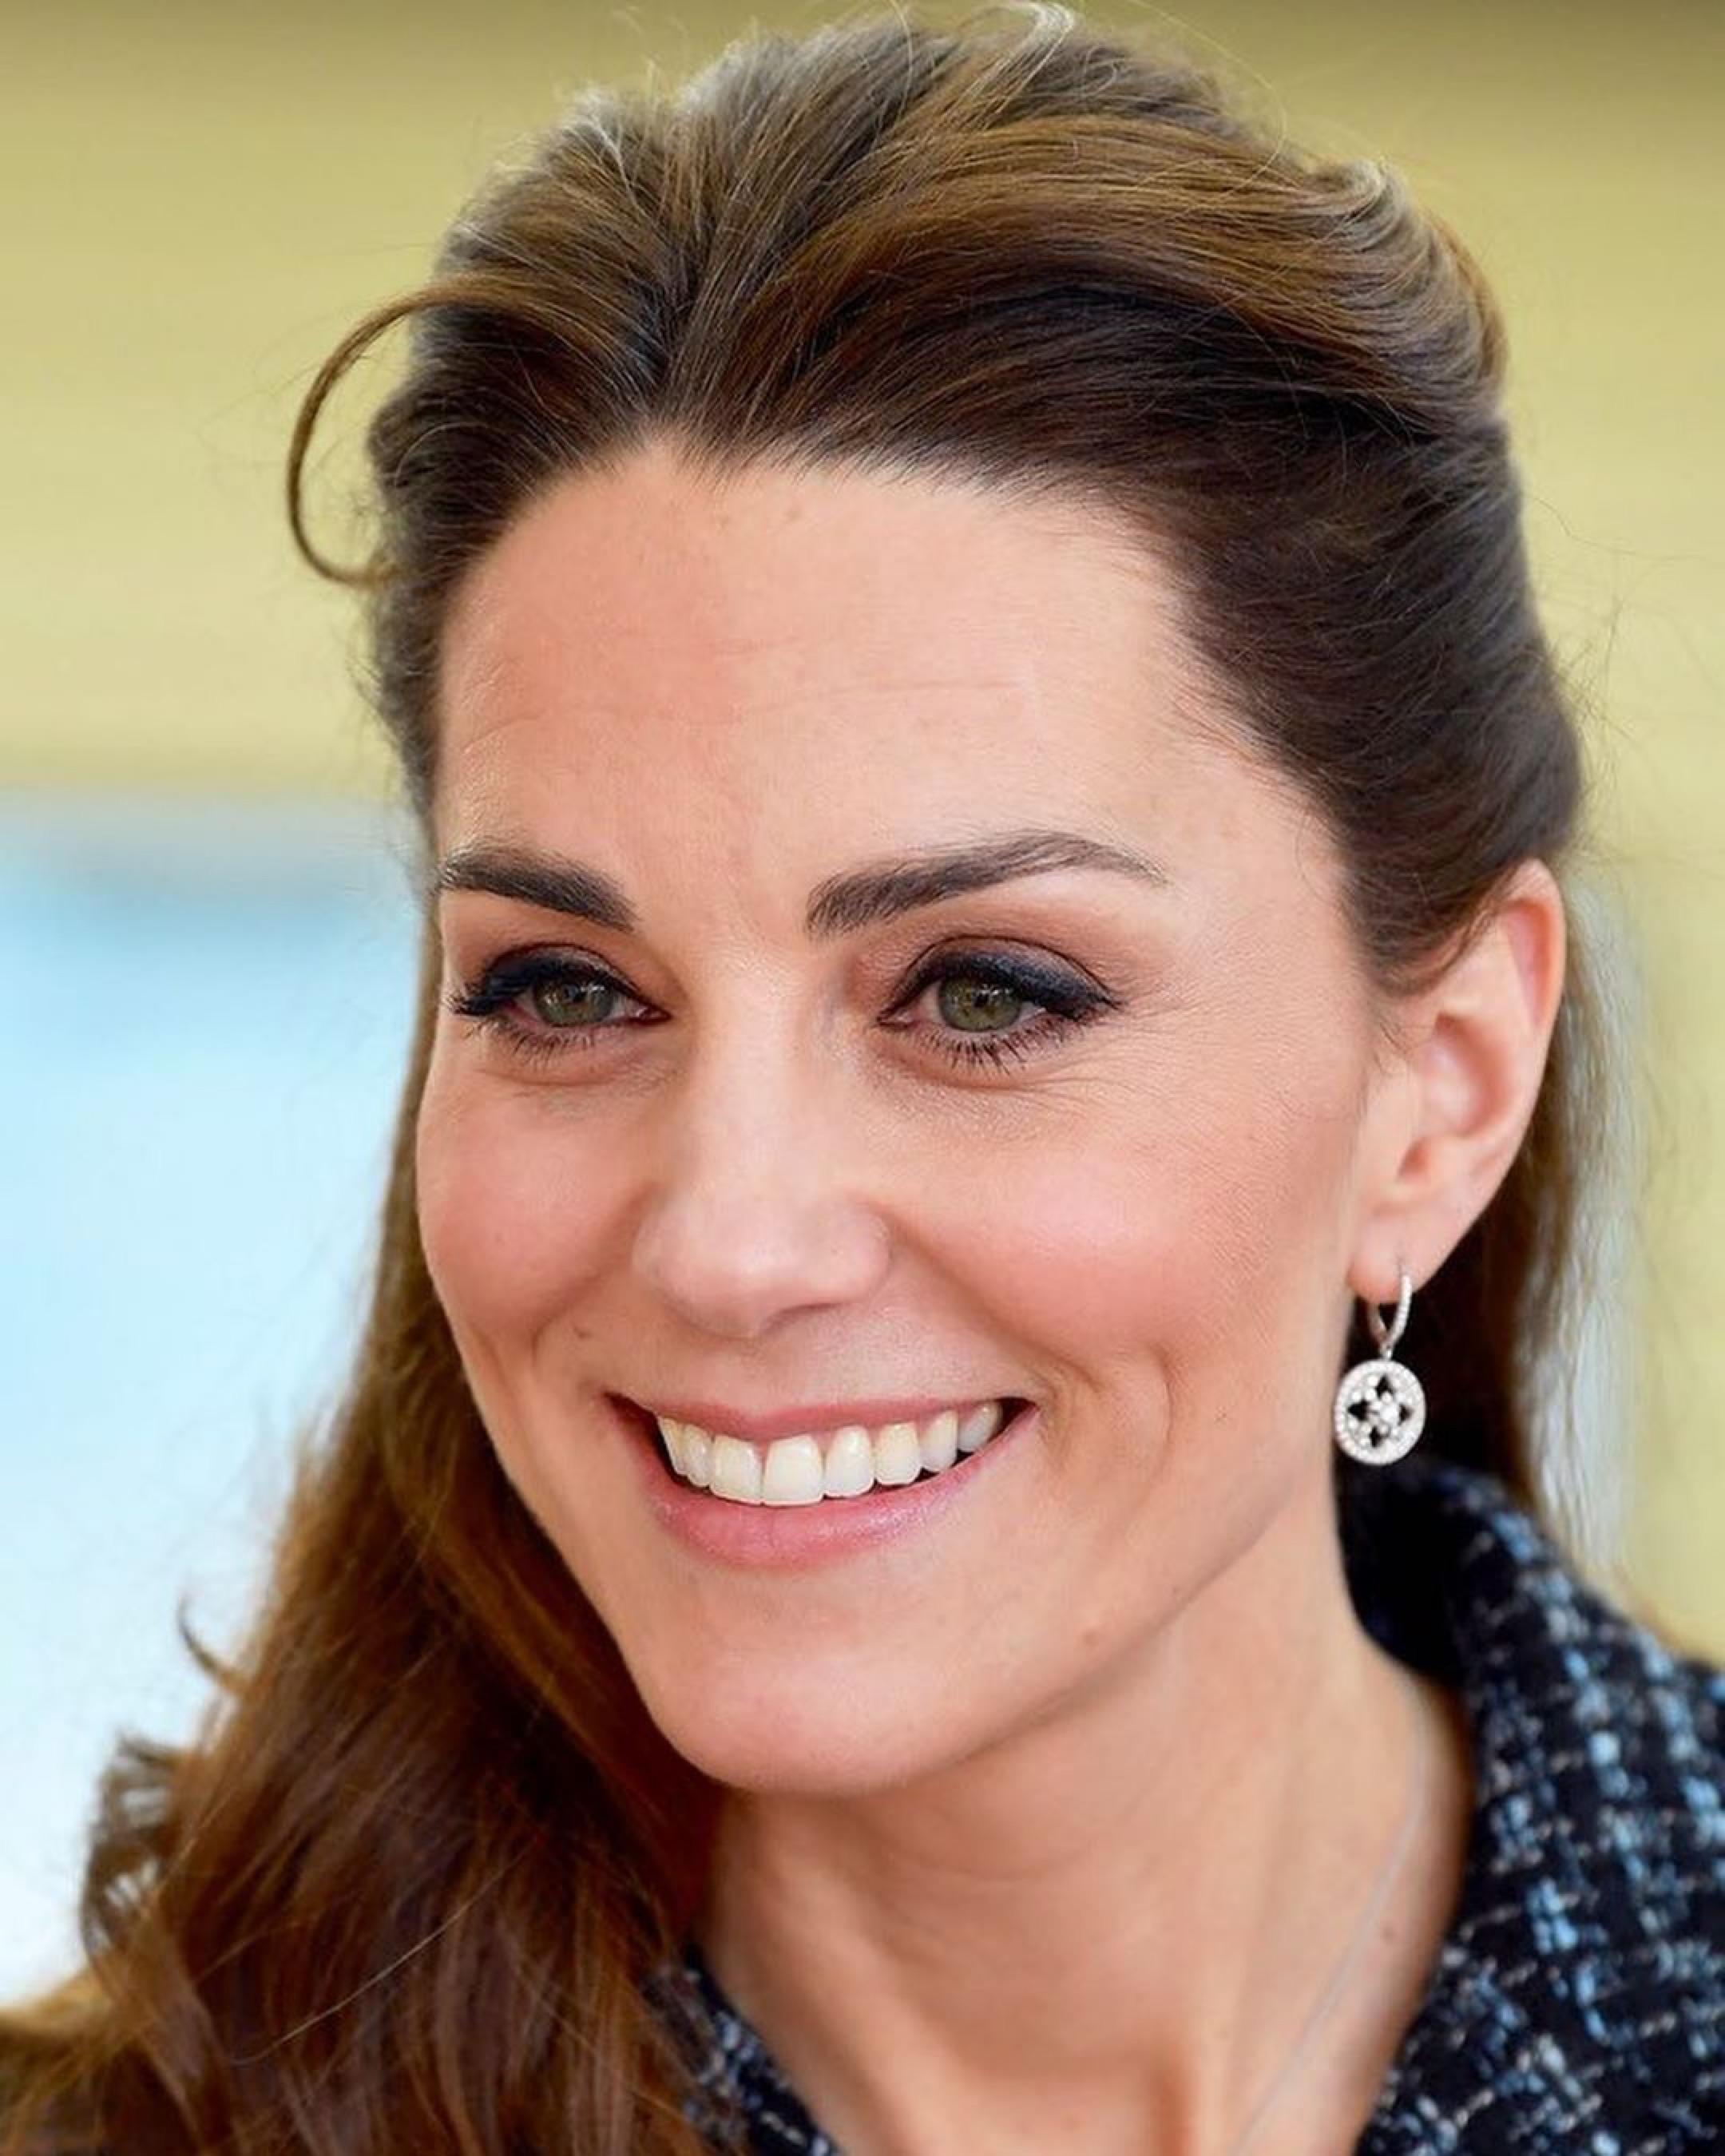 The Duchess Of Cambridge Visits The National Portrait Gallery Workshop ...